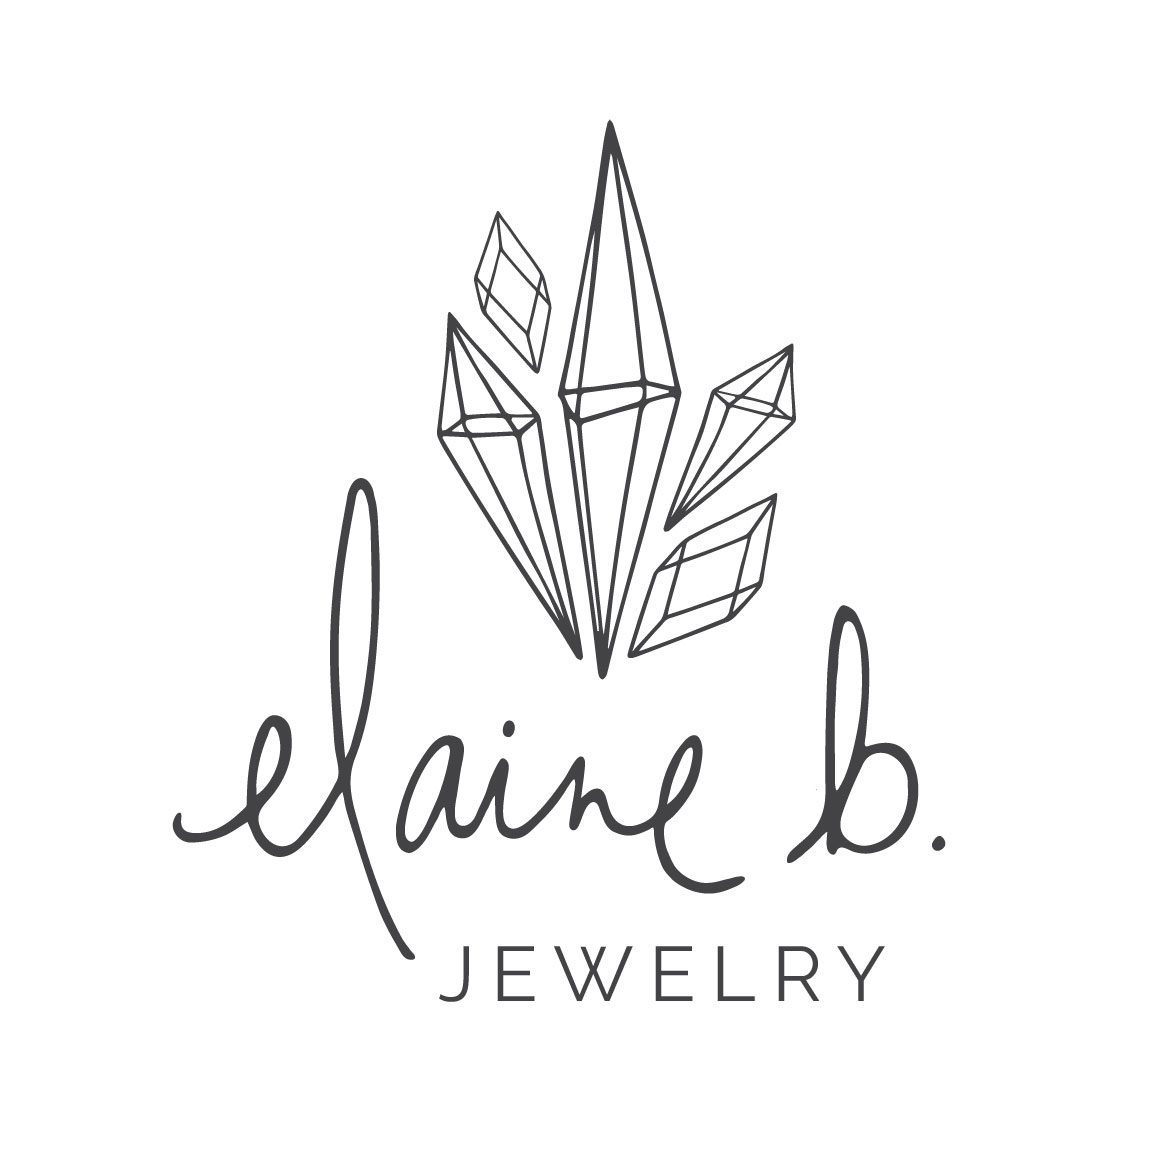 Featured image for “Forever Linked with Elaine B. Jewelry”